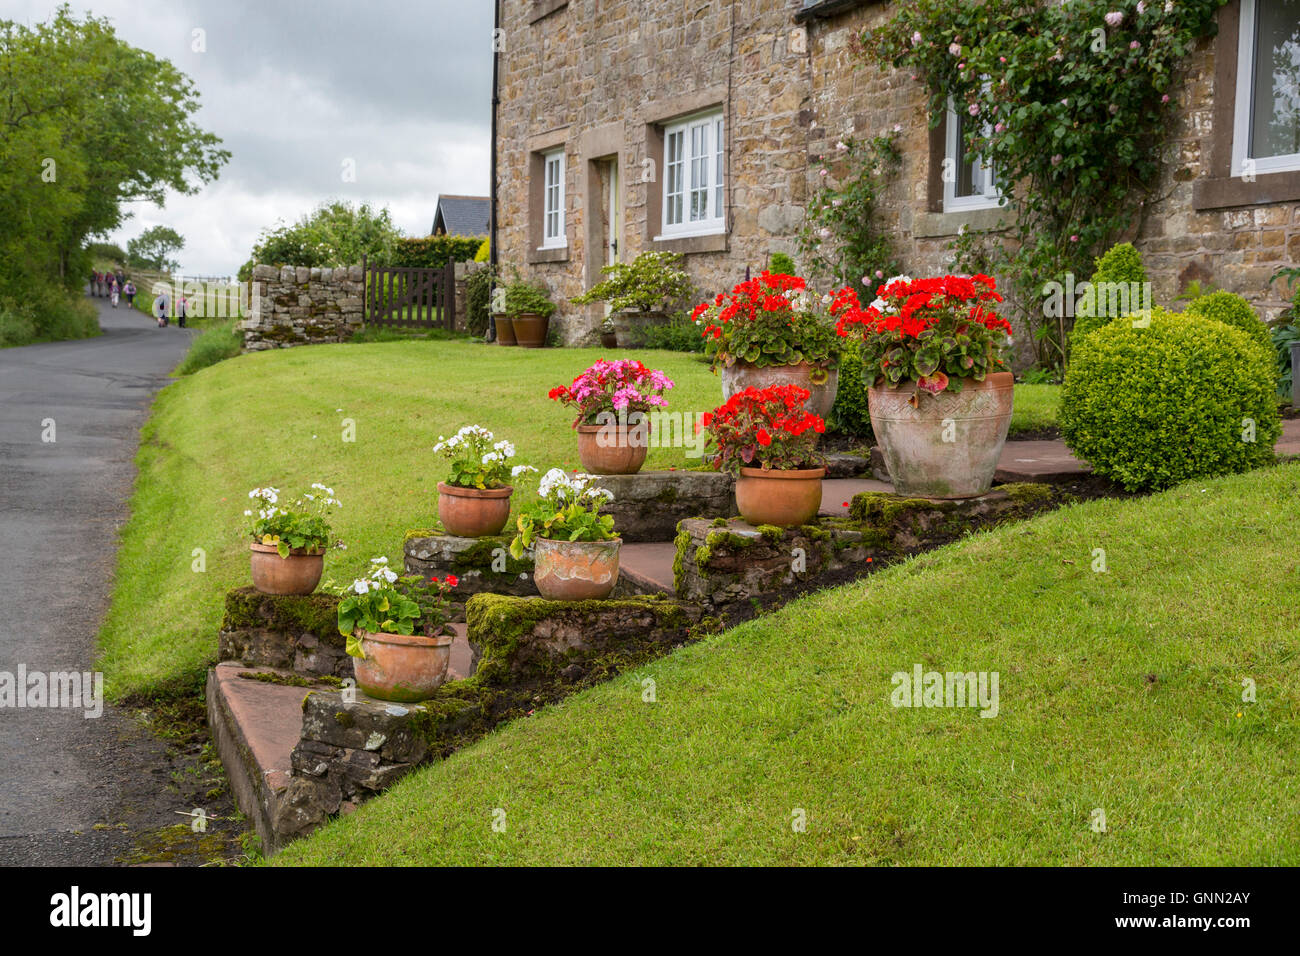 Banks, Cumbria, England, UK.  Village House on the Route of Hadrian's Wall Footpath.  Hikers in the Distance. Stock Photo